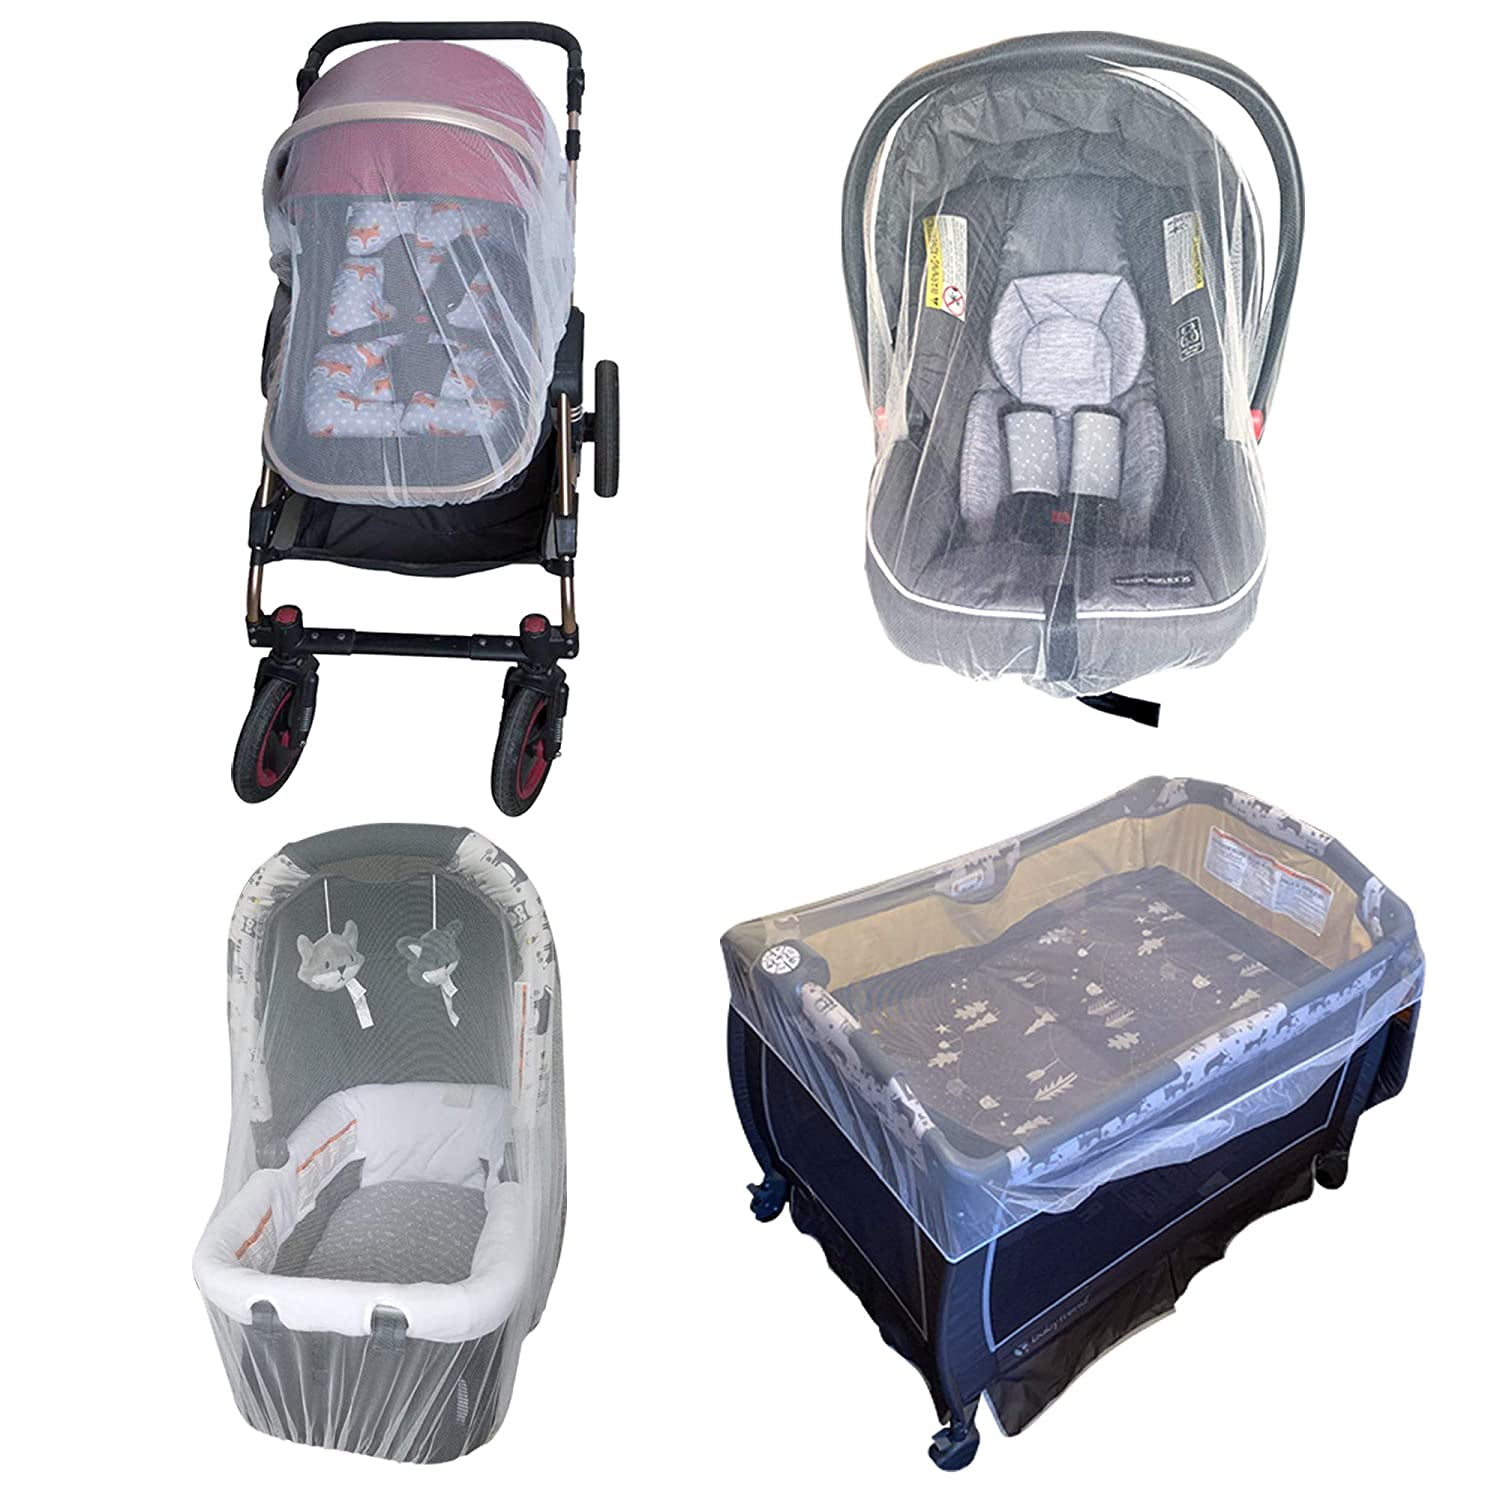 Kids Baby Mosquito Net for Stroller,Carriers,Car Seats,Cradles Bed Summer White 